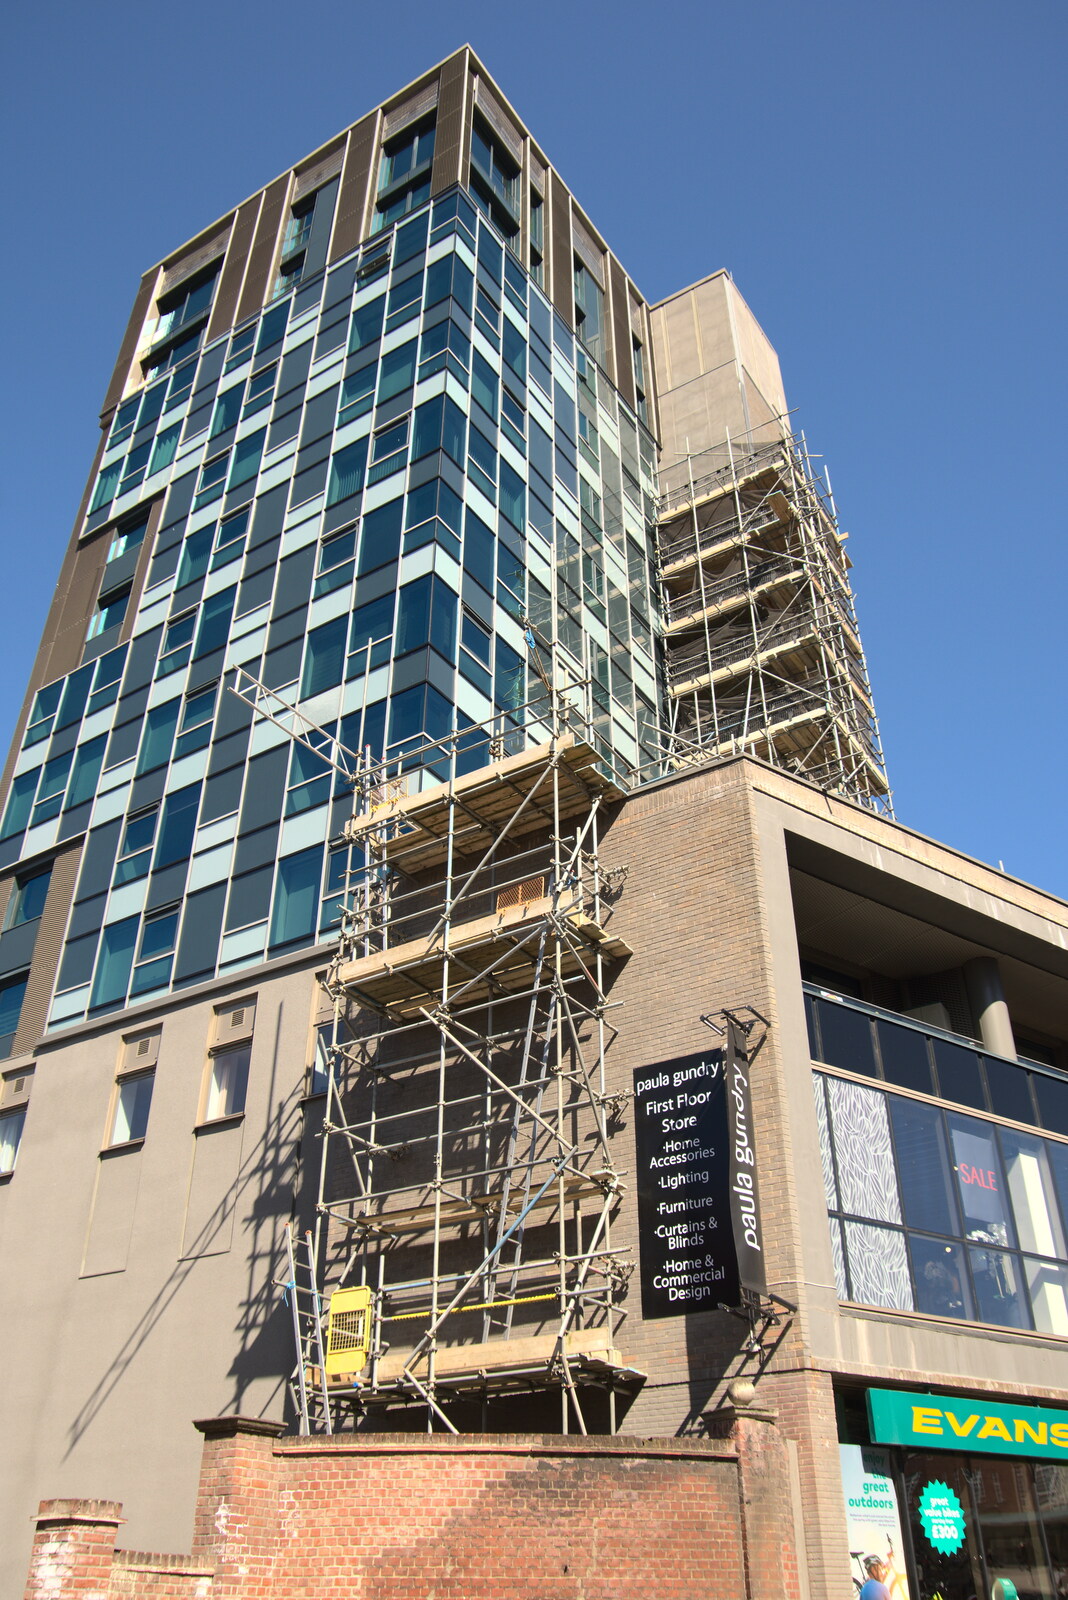 Westlegate Tower gets some work done from The Death of Debenhams, Rampant Horse Street, Norwich, Norfolk - 17th April 2021